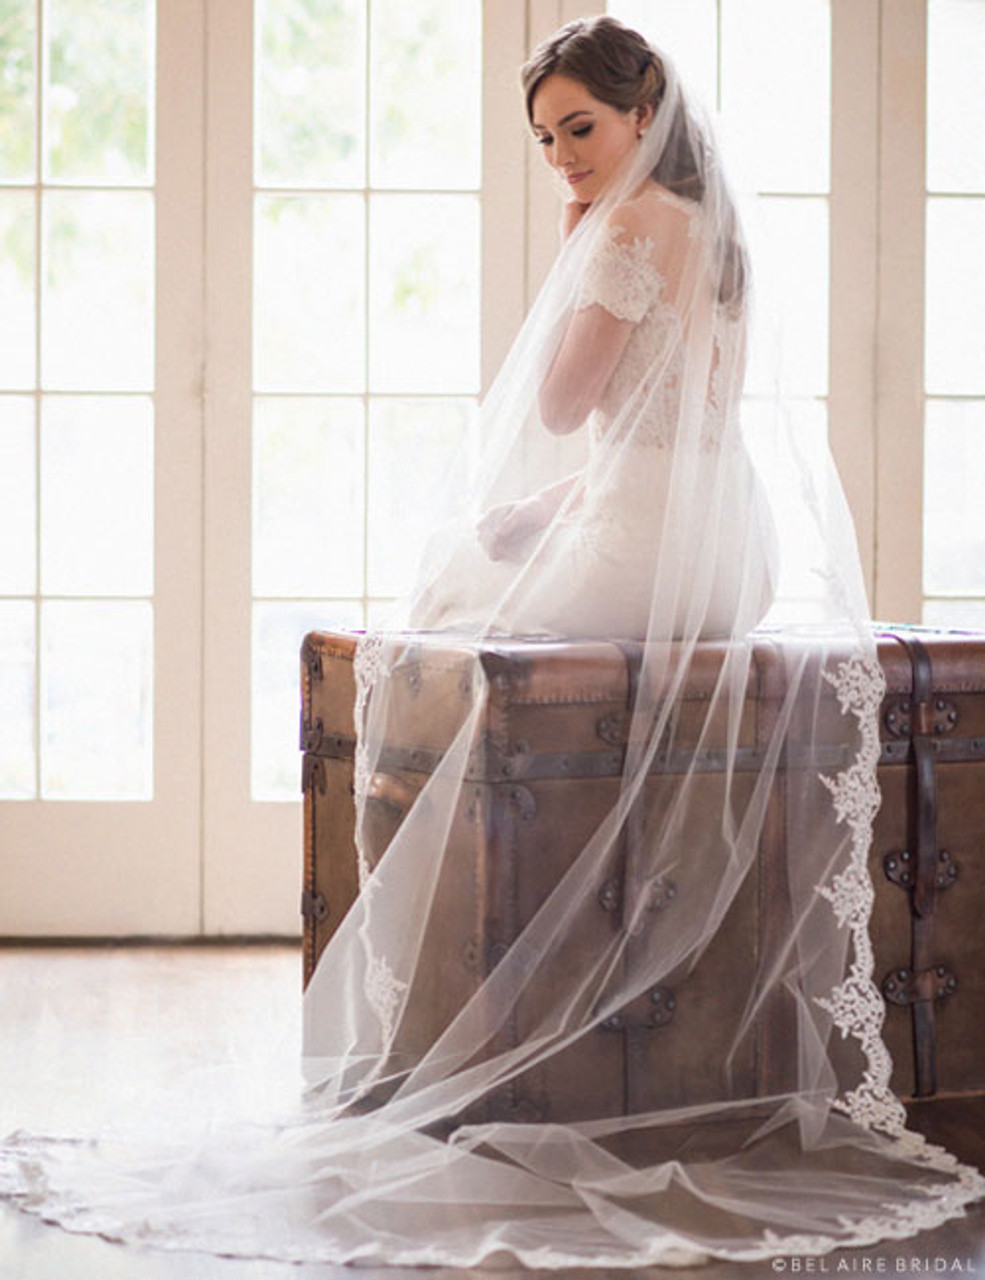 Waltz Length Veil with Pencil Edge |  Off-White / 108 Inches / 108 Inches